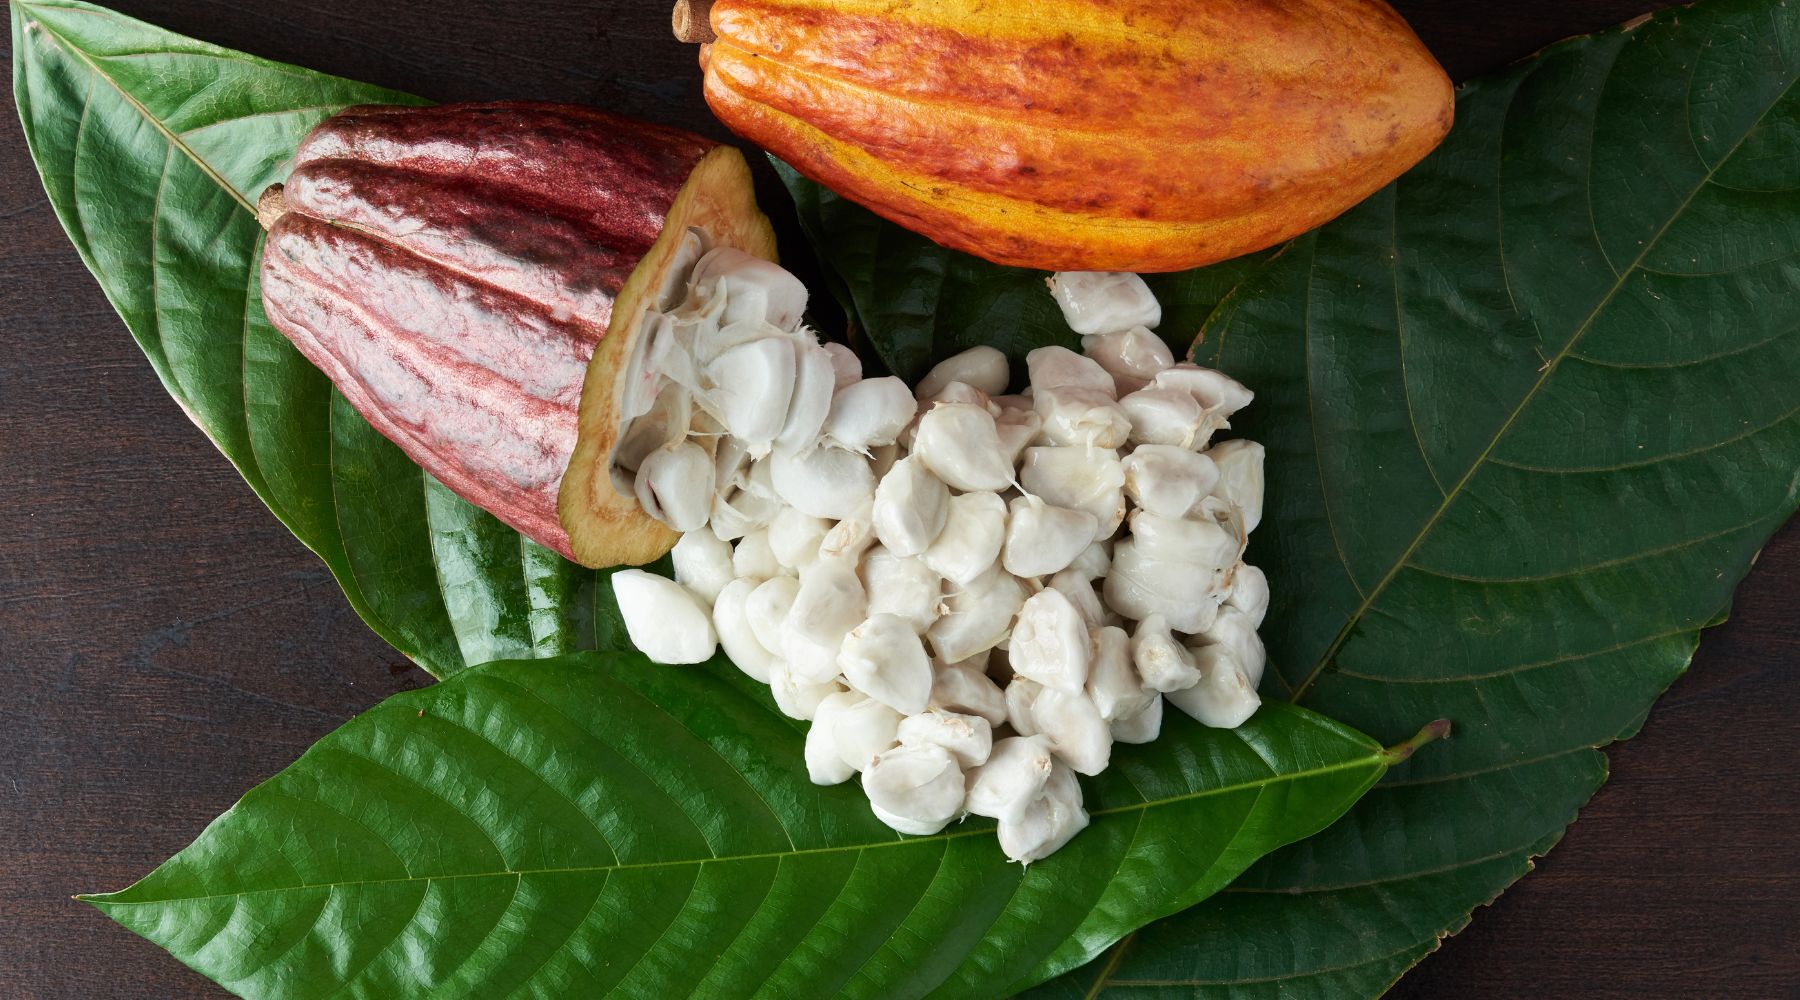 How can the Whole Cacao Pod be Upcycled? Cacao Fruit